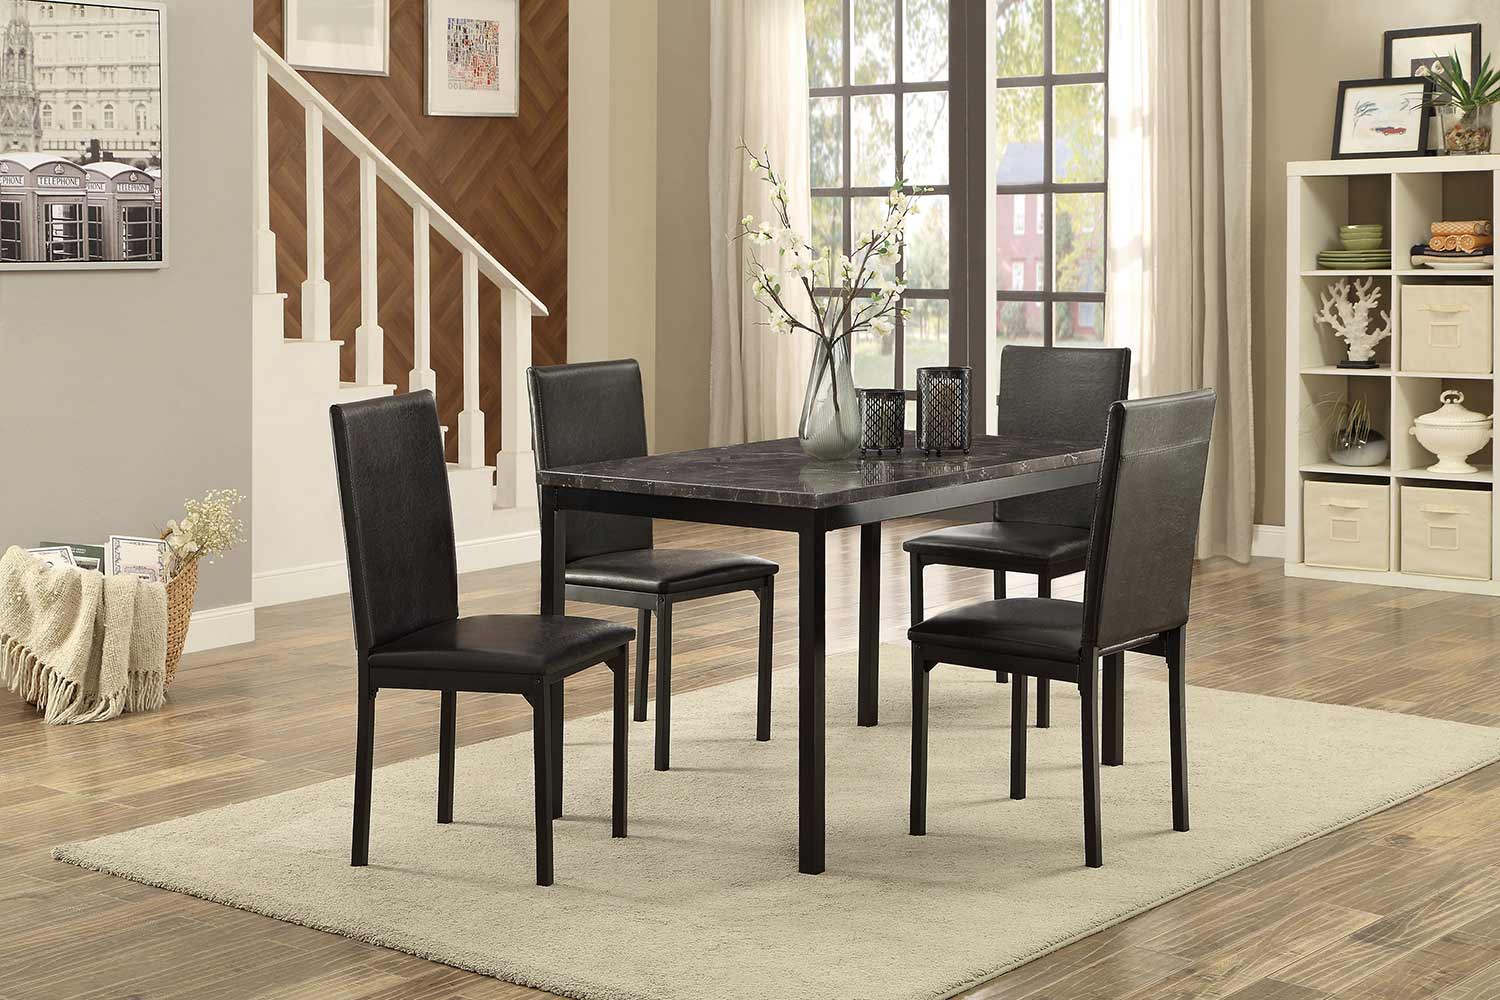 Homelegance Tempe Dining Set - Faux Marble Top